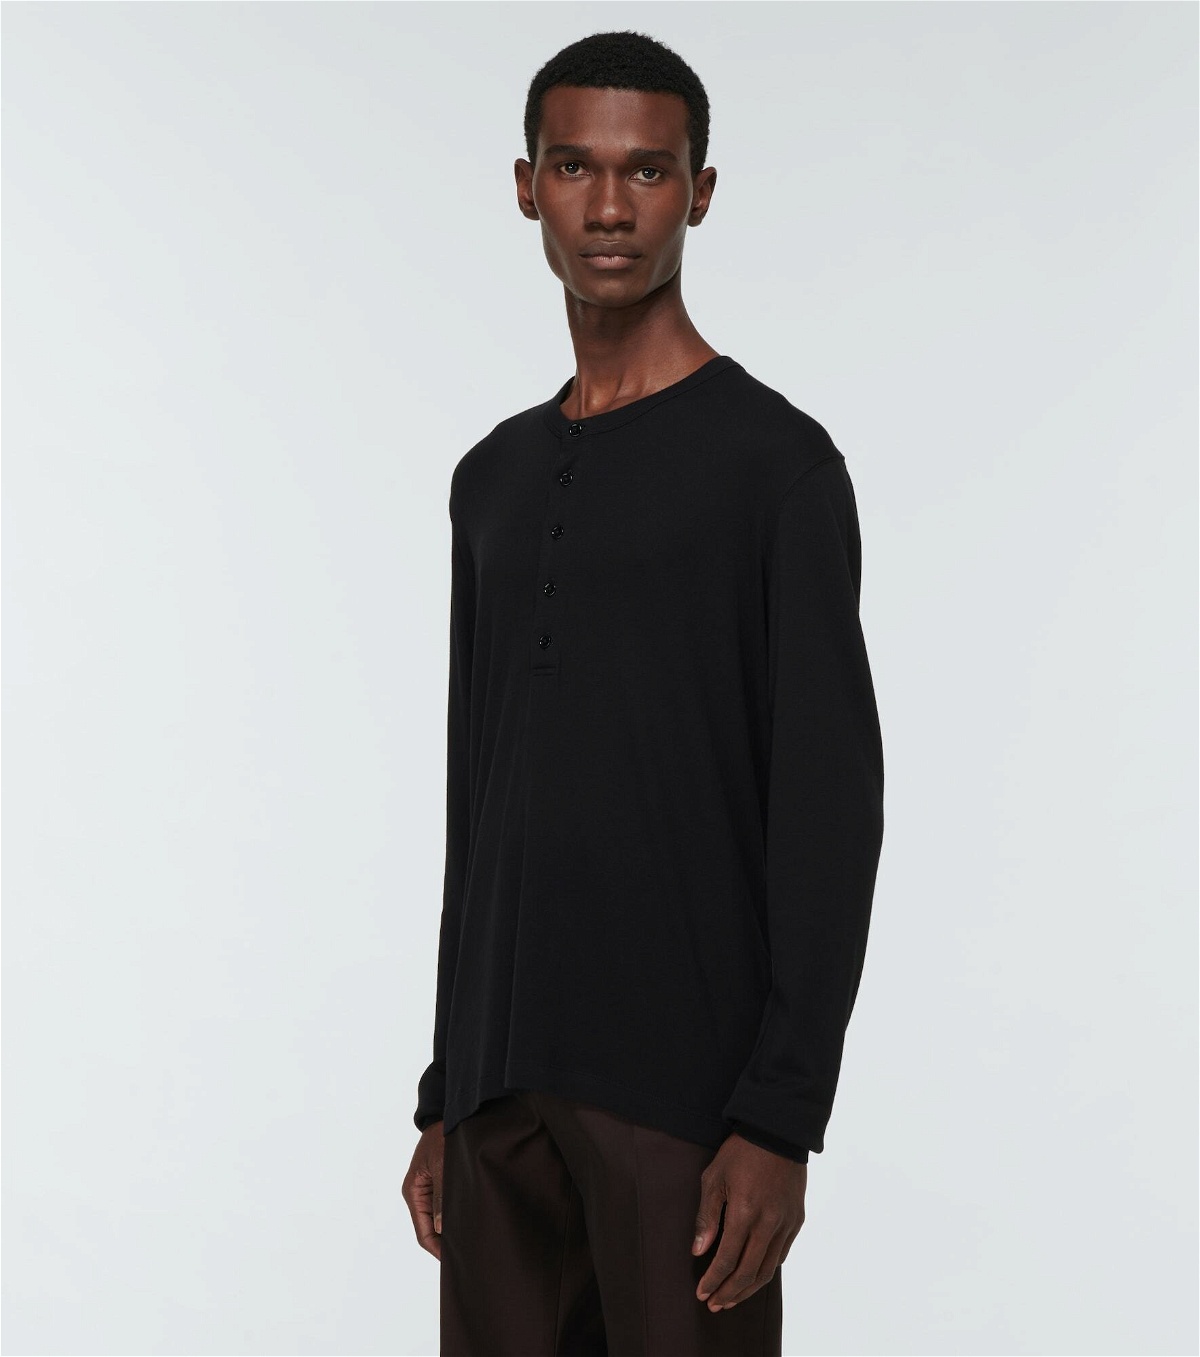 Tom Ford - Jersey Henley shirt TOM FORD